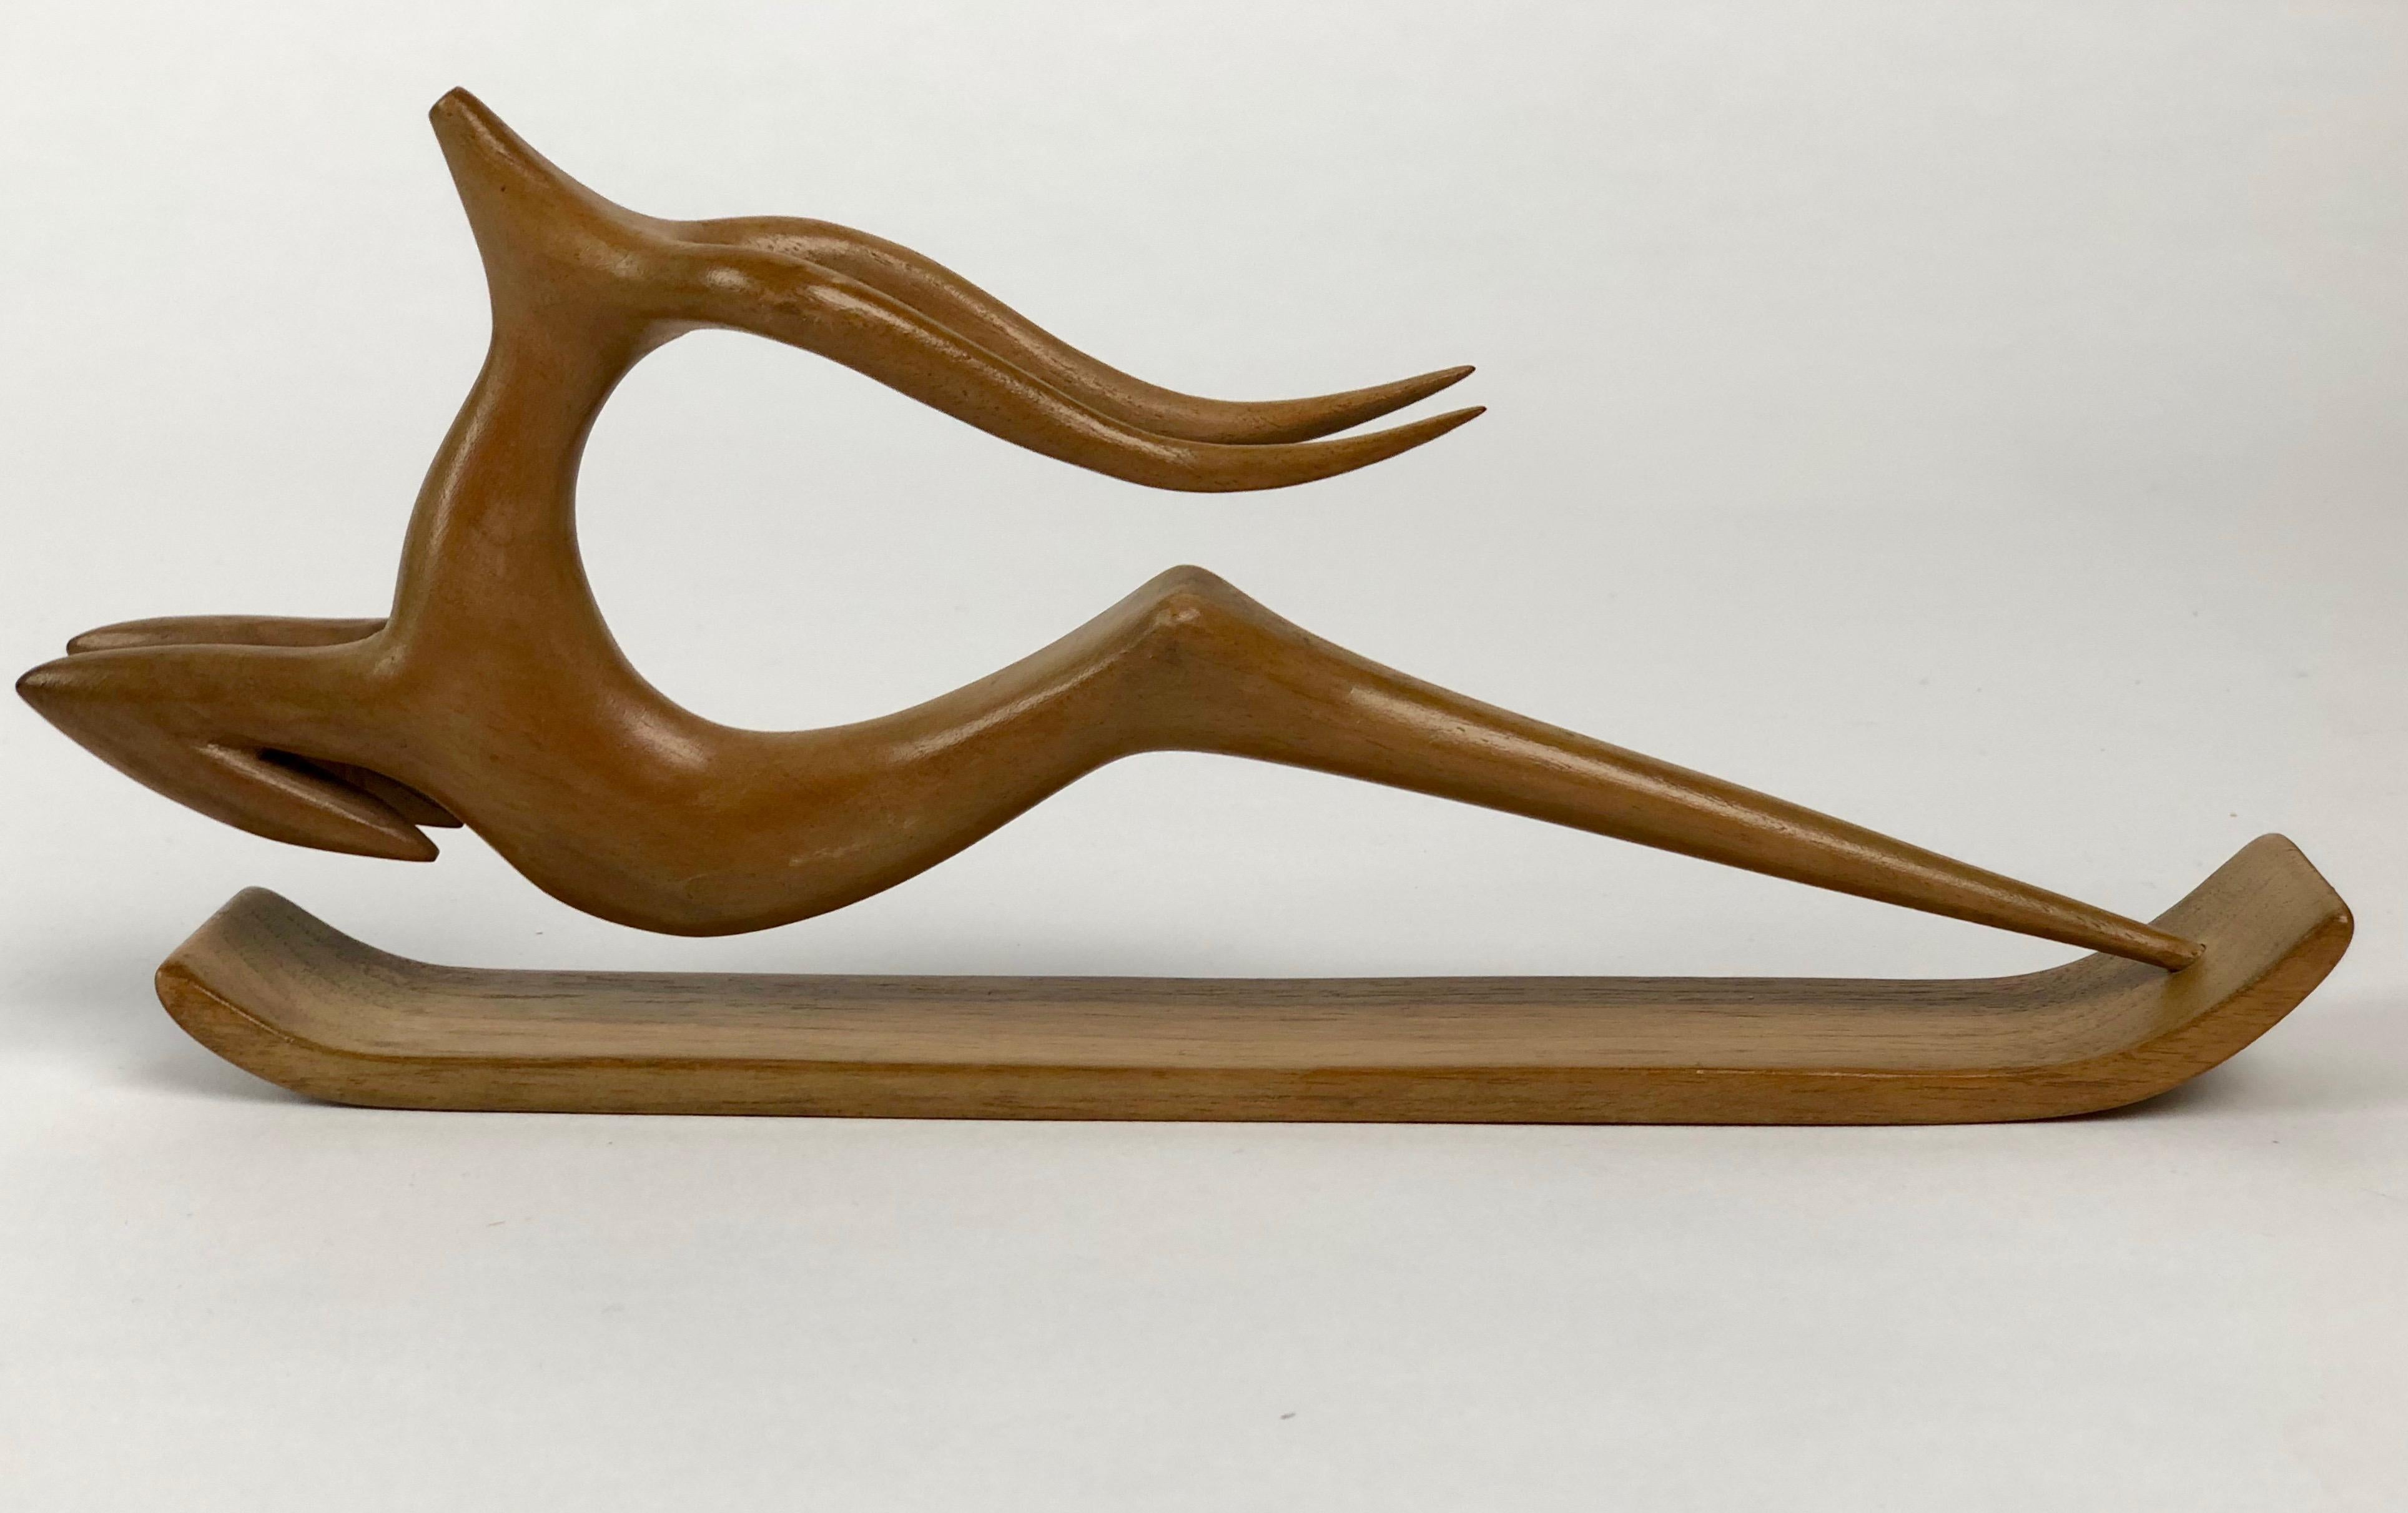 Wonderful springing gazelle sculpture designed and made in the Hagenauer Werkstätte Wien expertly carved from a single piece of wood includes the original base for display.